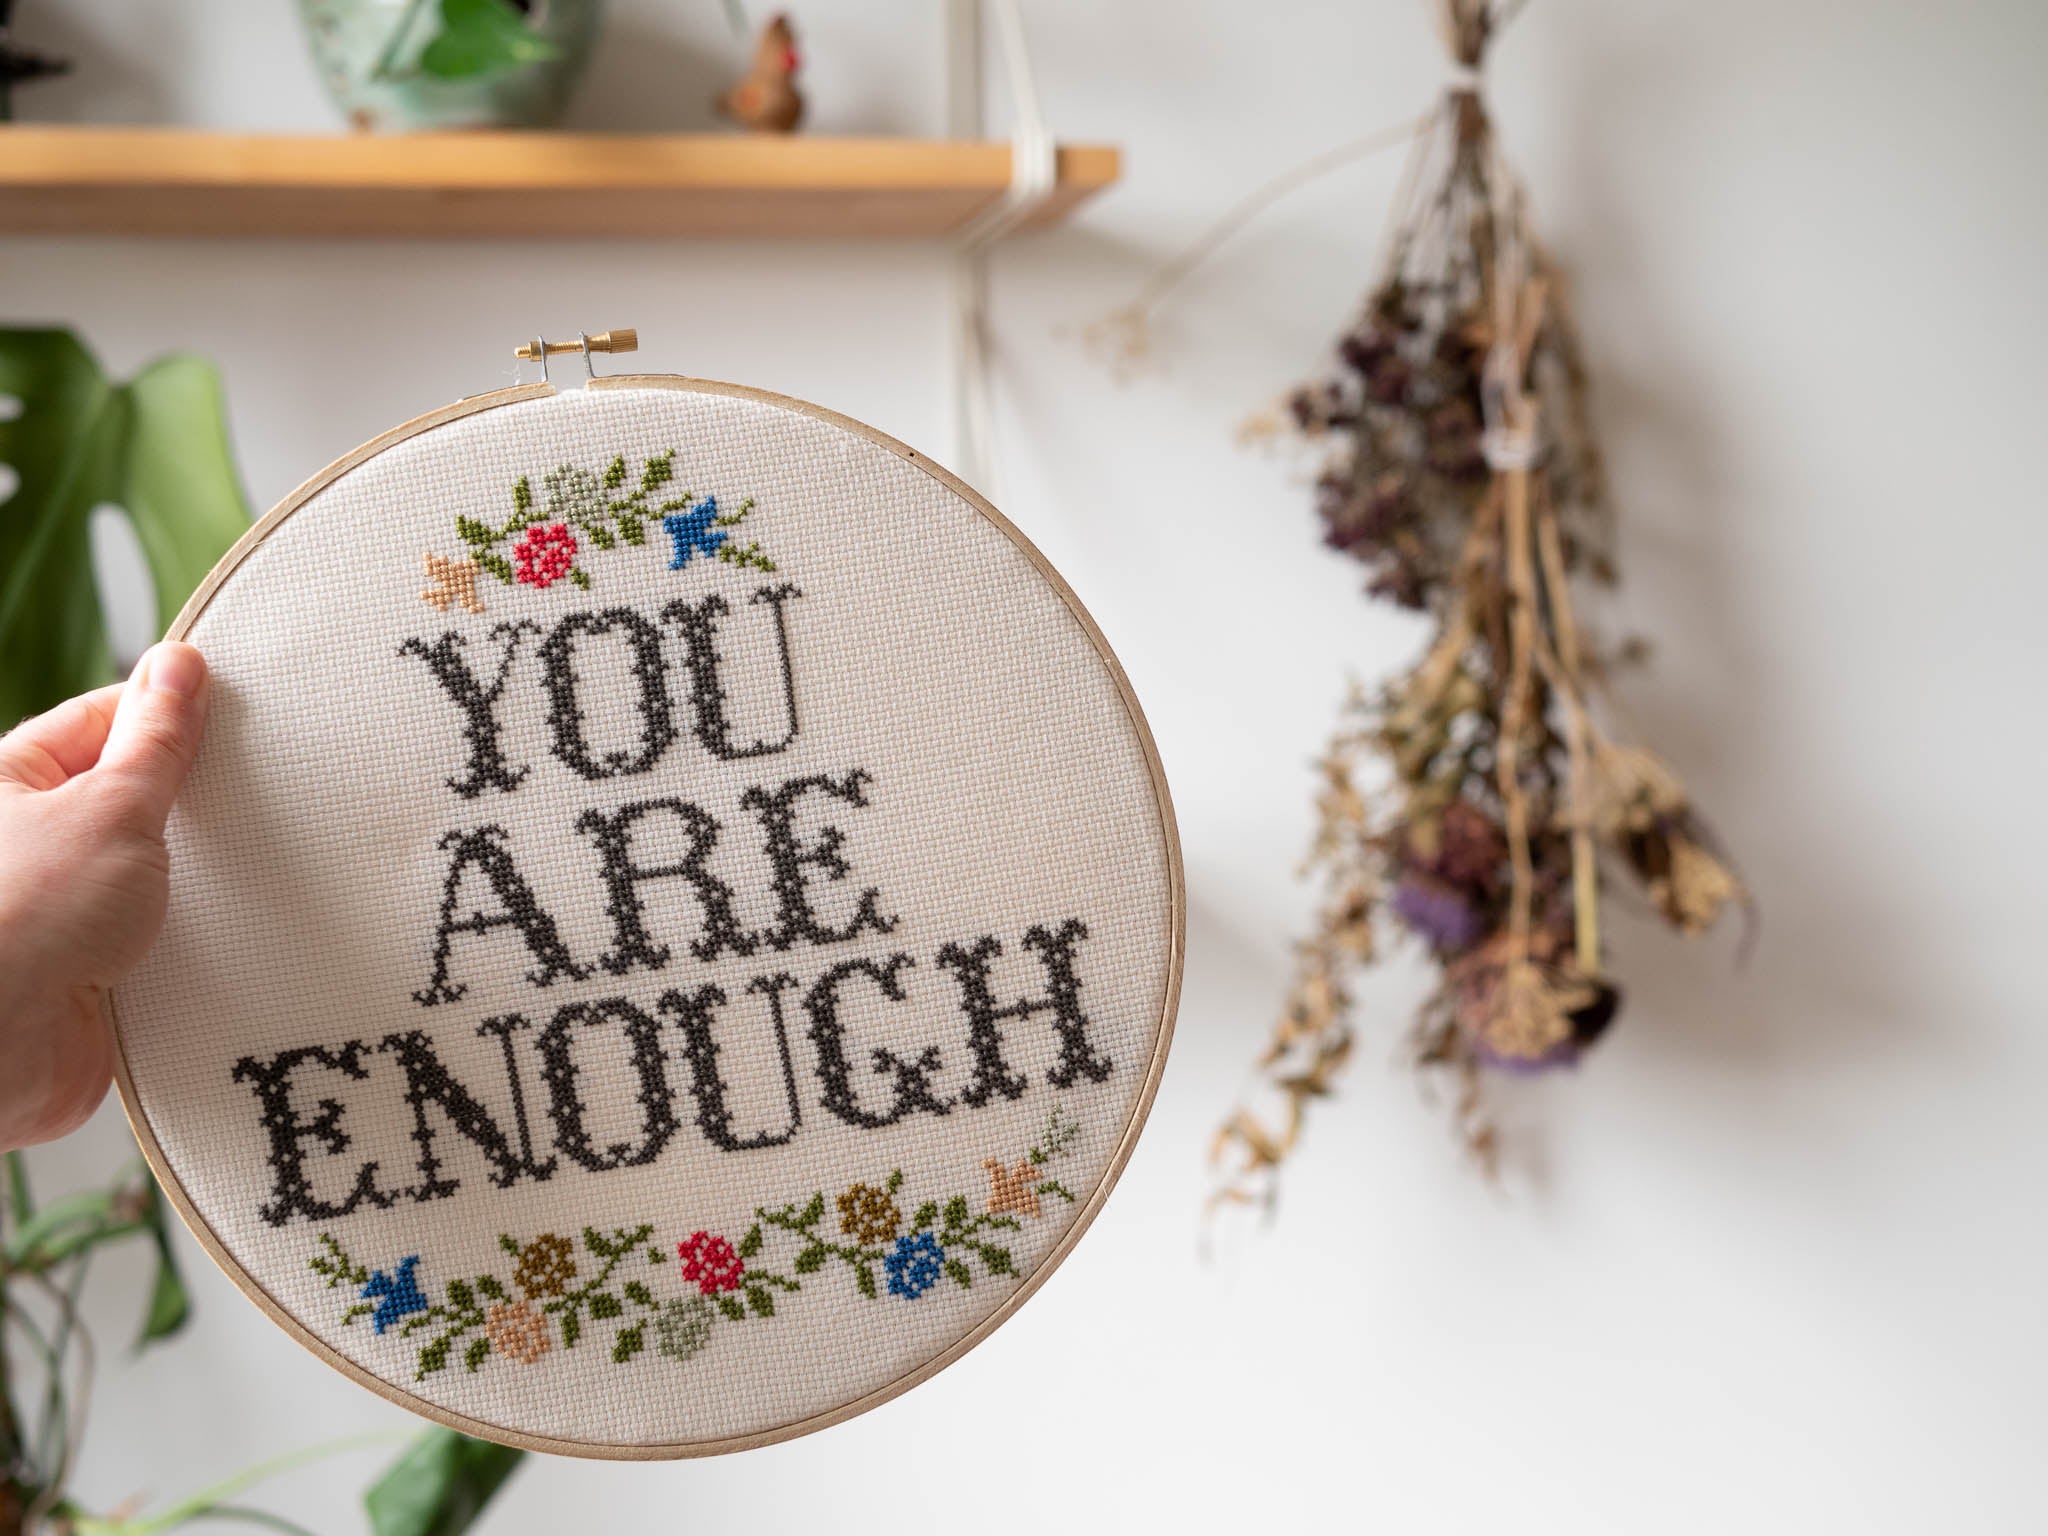 How to Begin Your First Large Cross Stitch Project